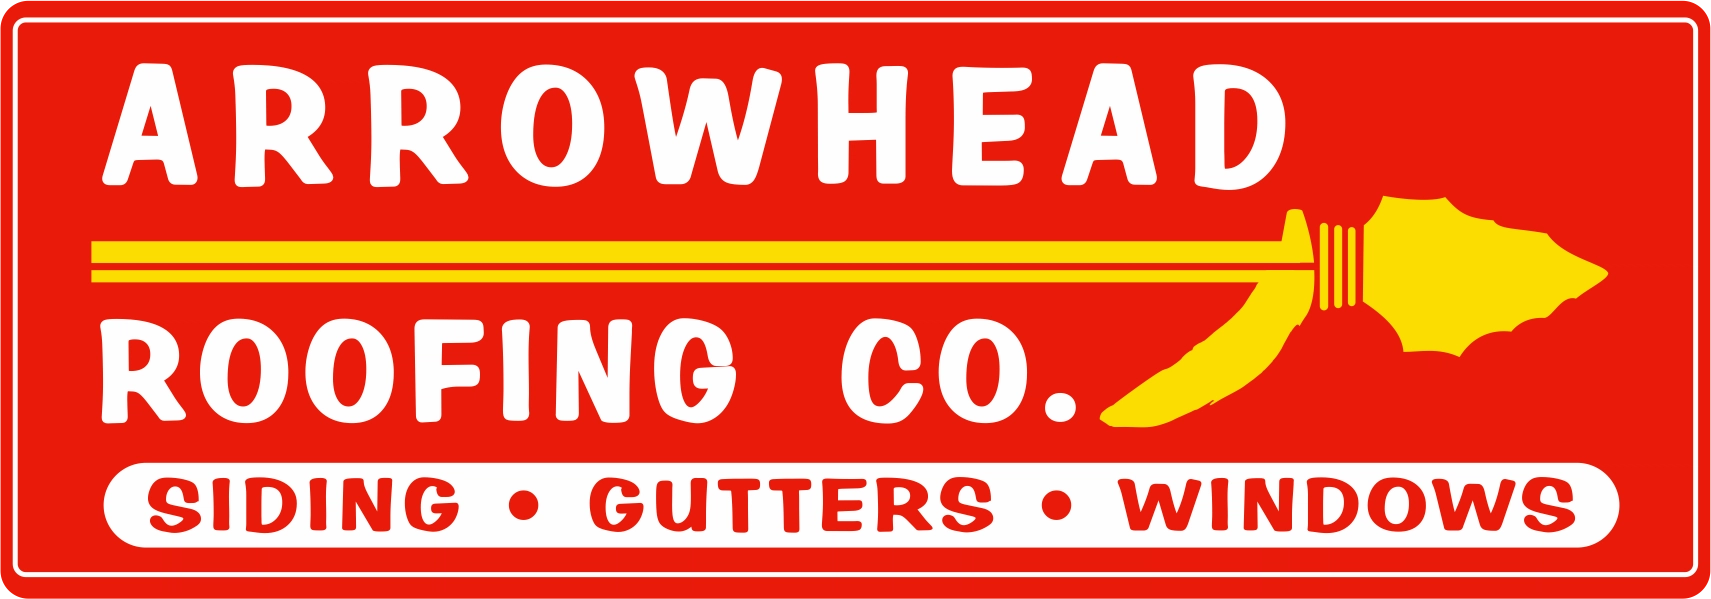 Arrowhead Roofing, Siding, Gutters and Windows Logo